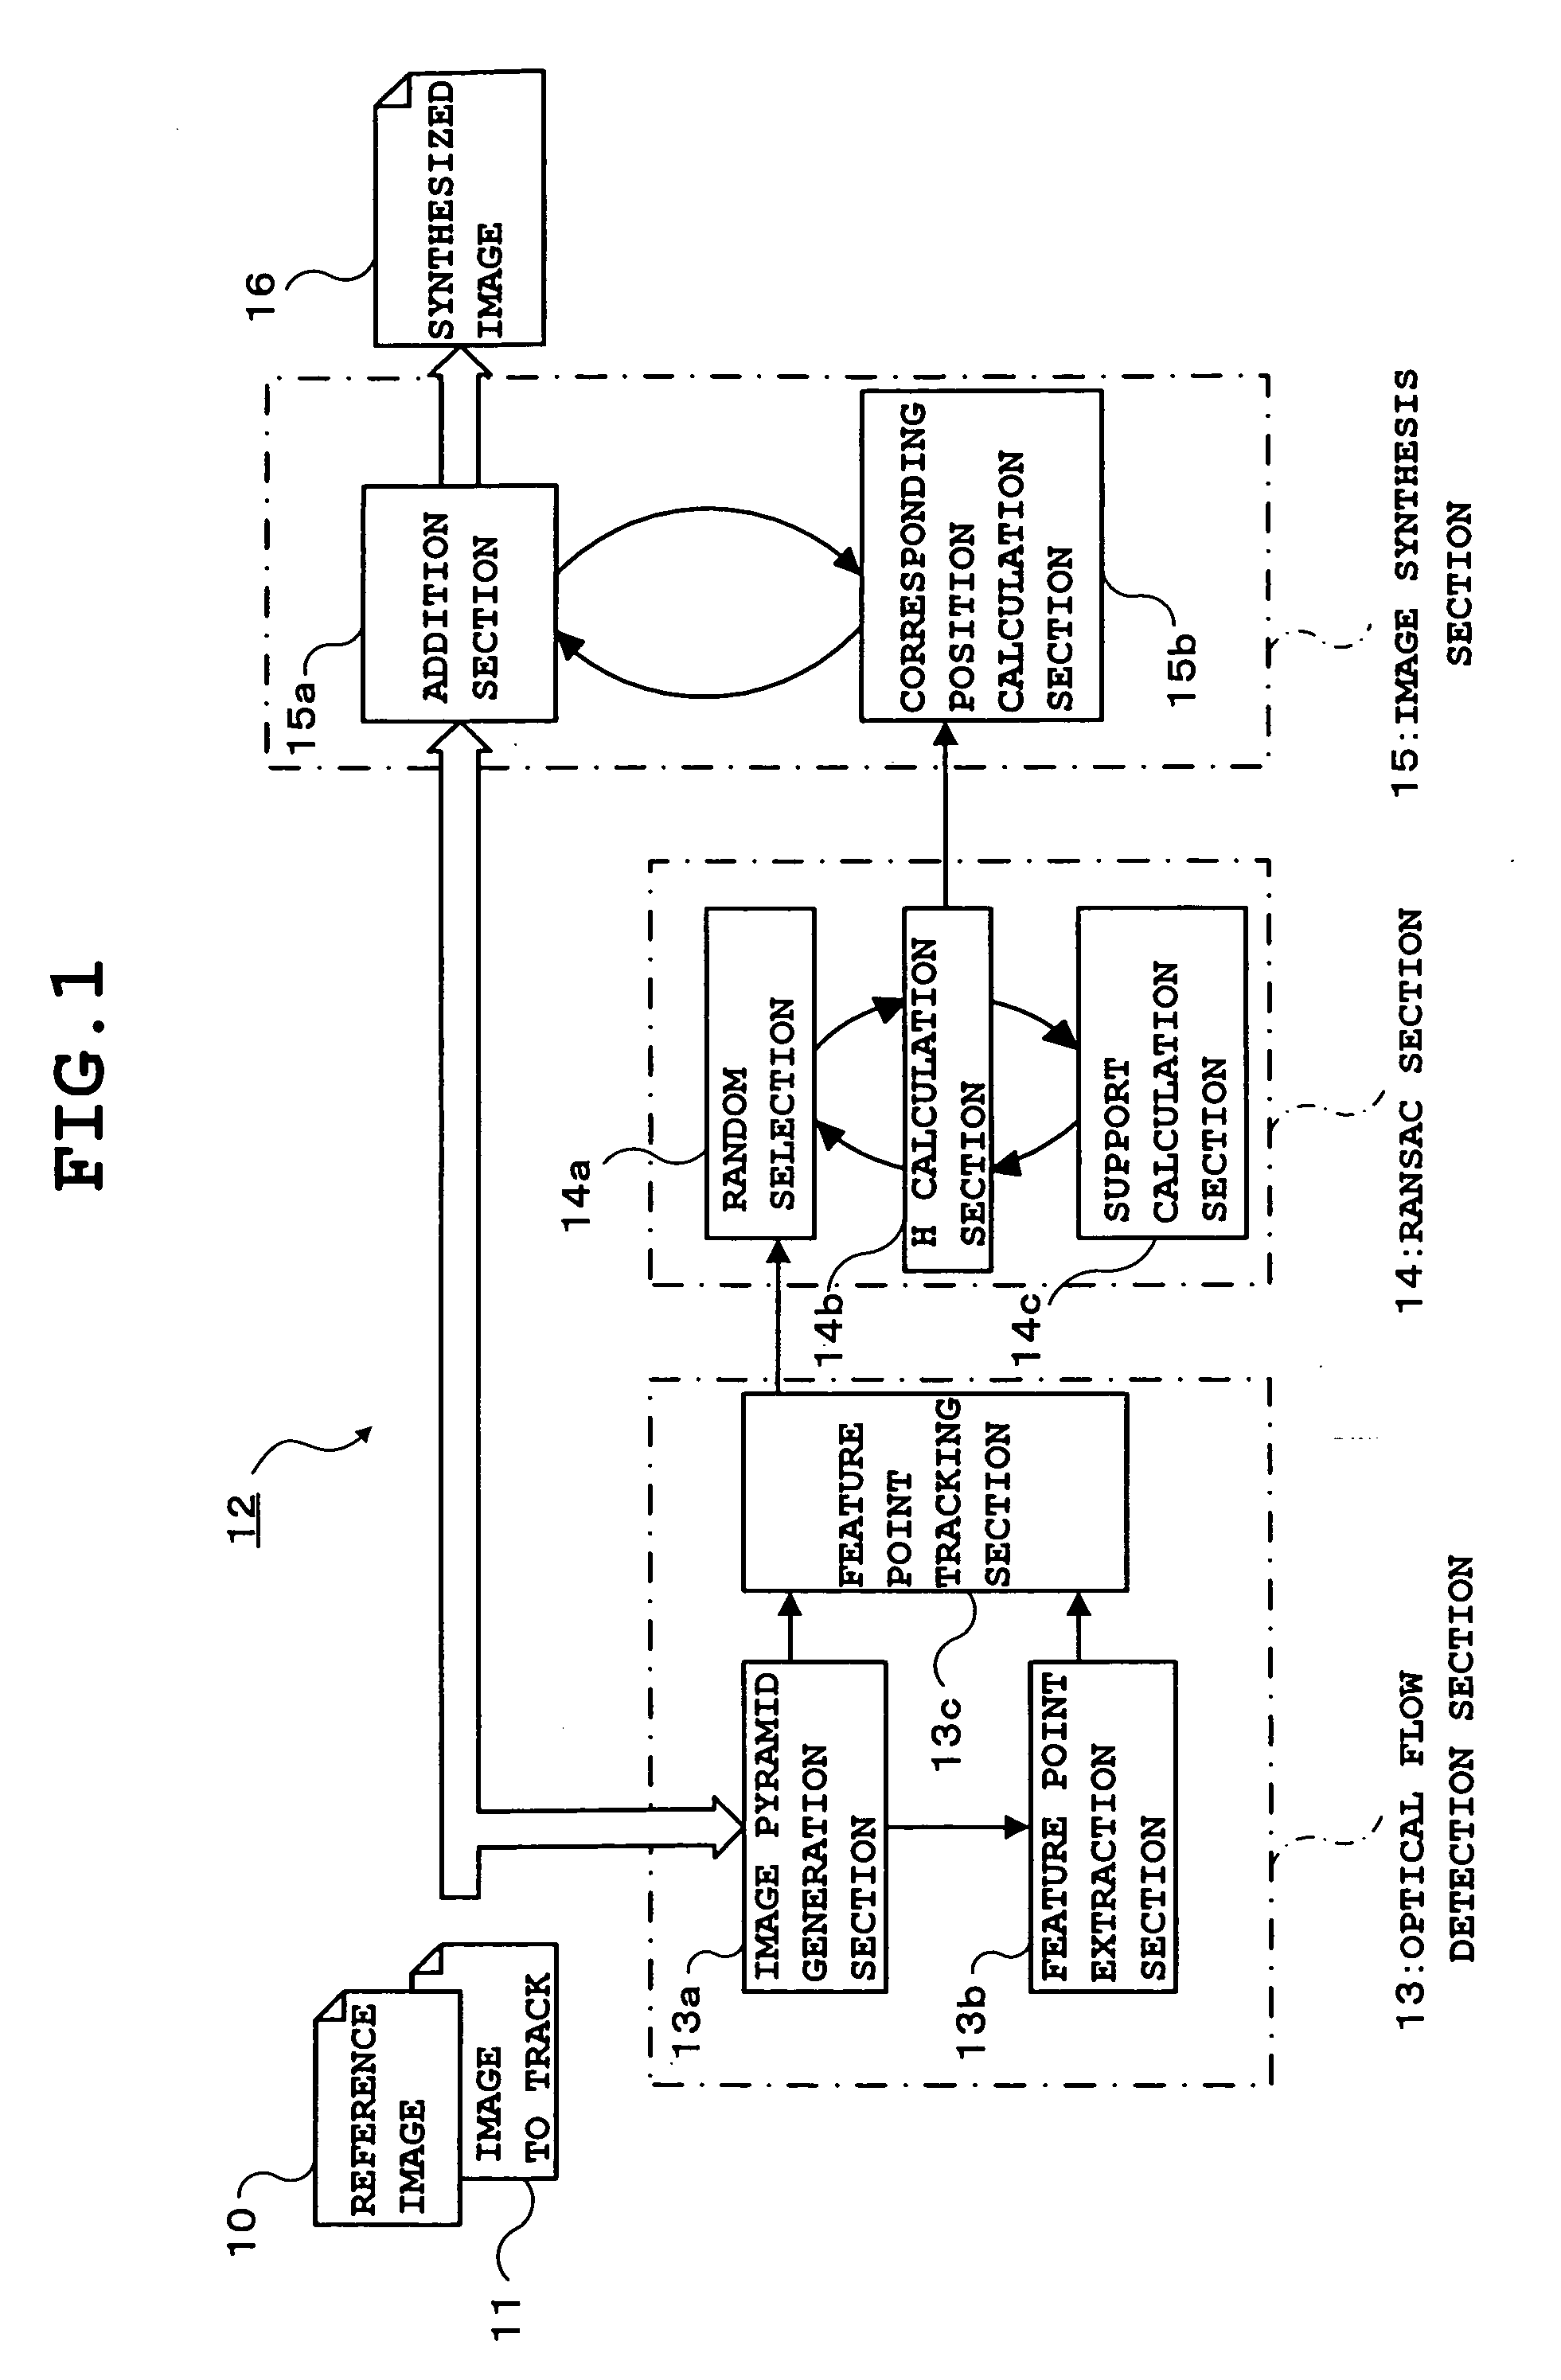 Apparatus and method for aligning images by detecting features